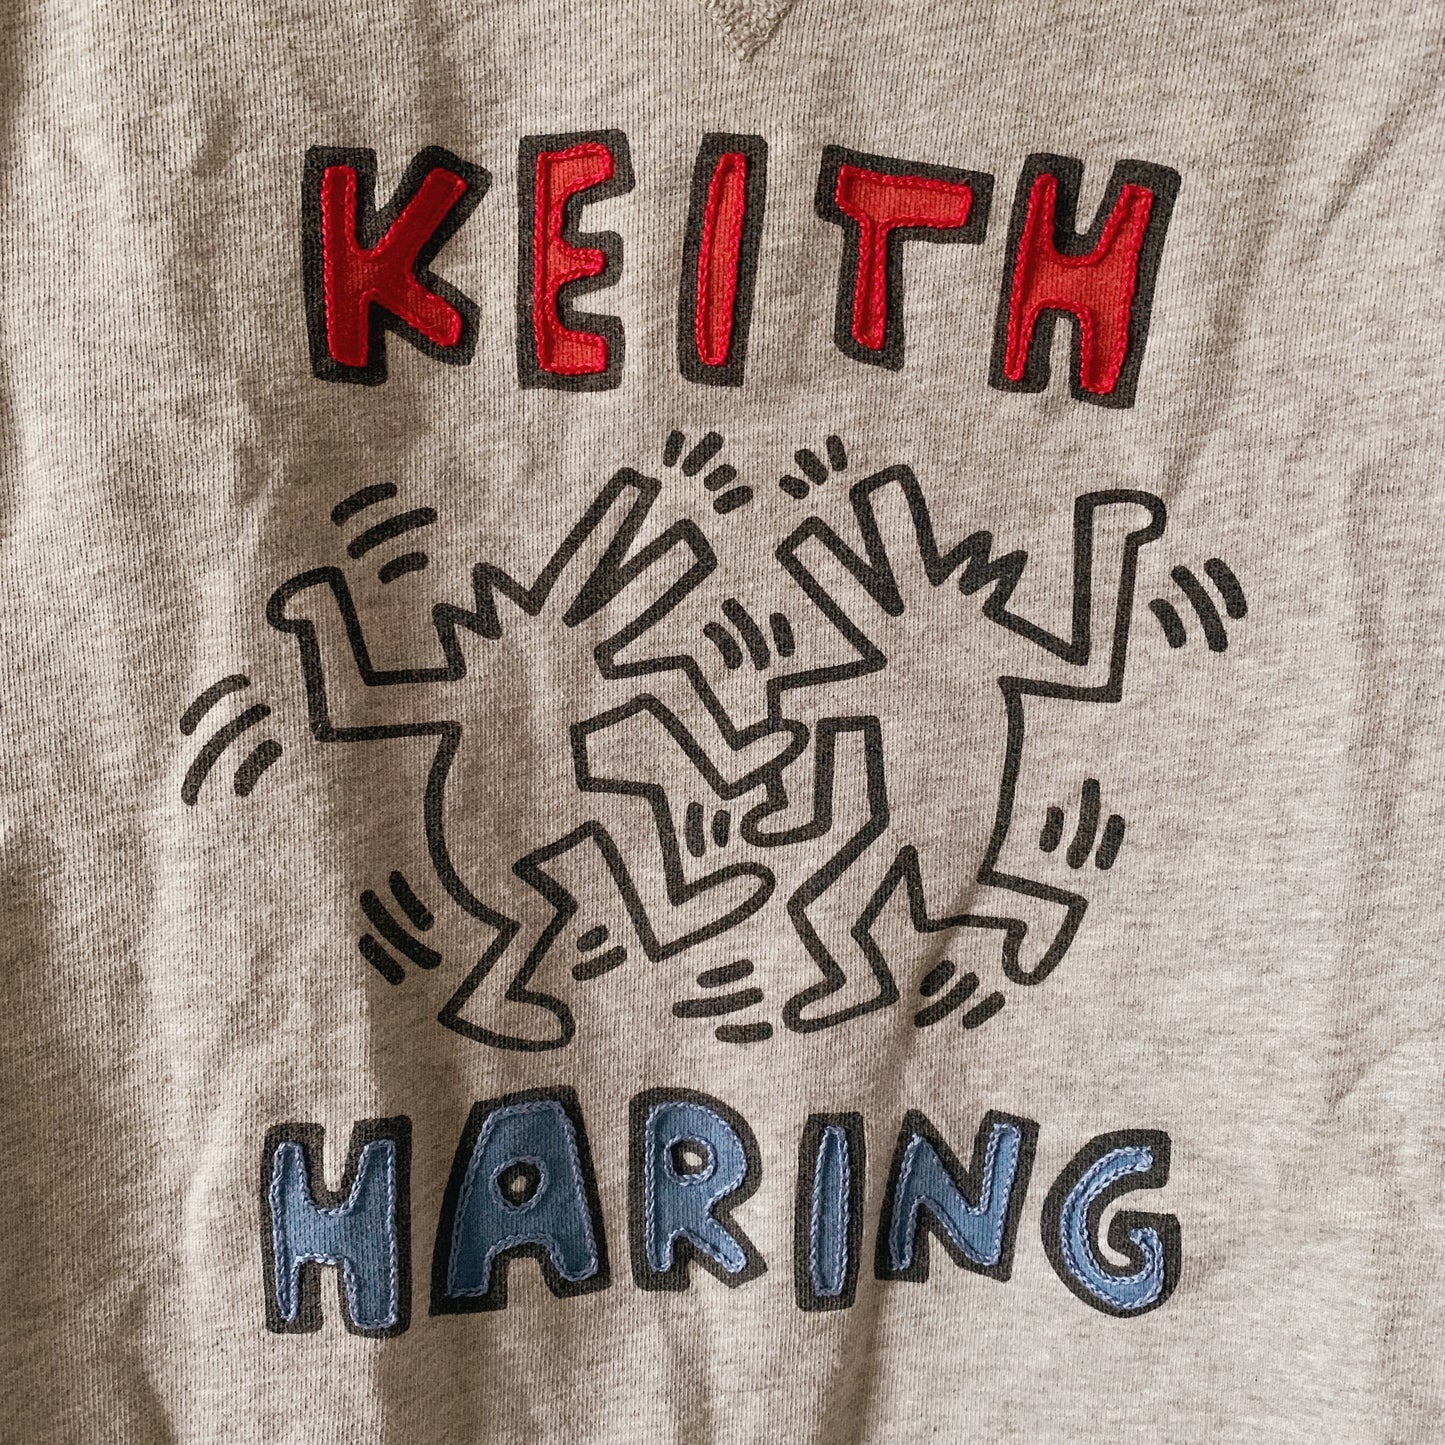 Keith Haring Improved Upcycle